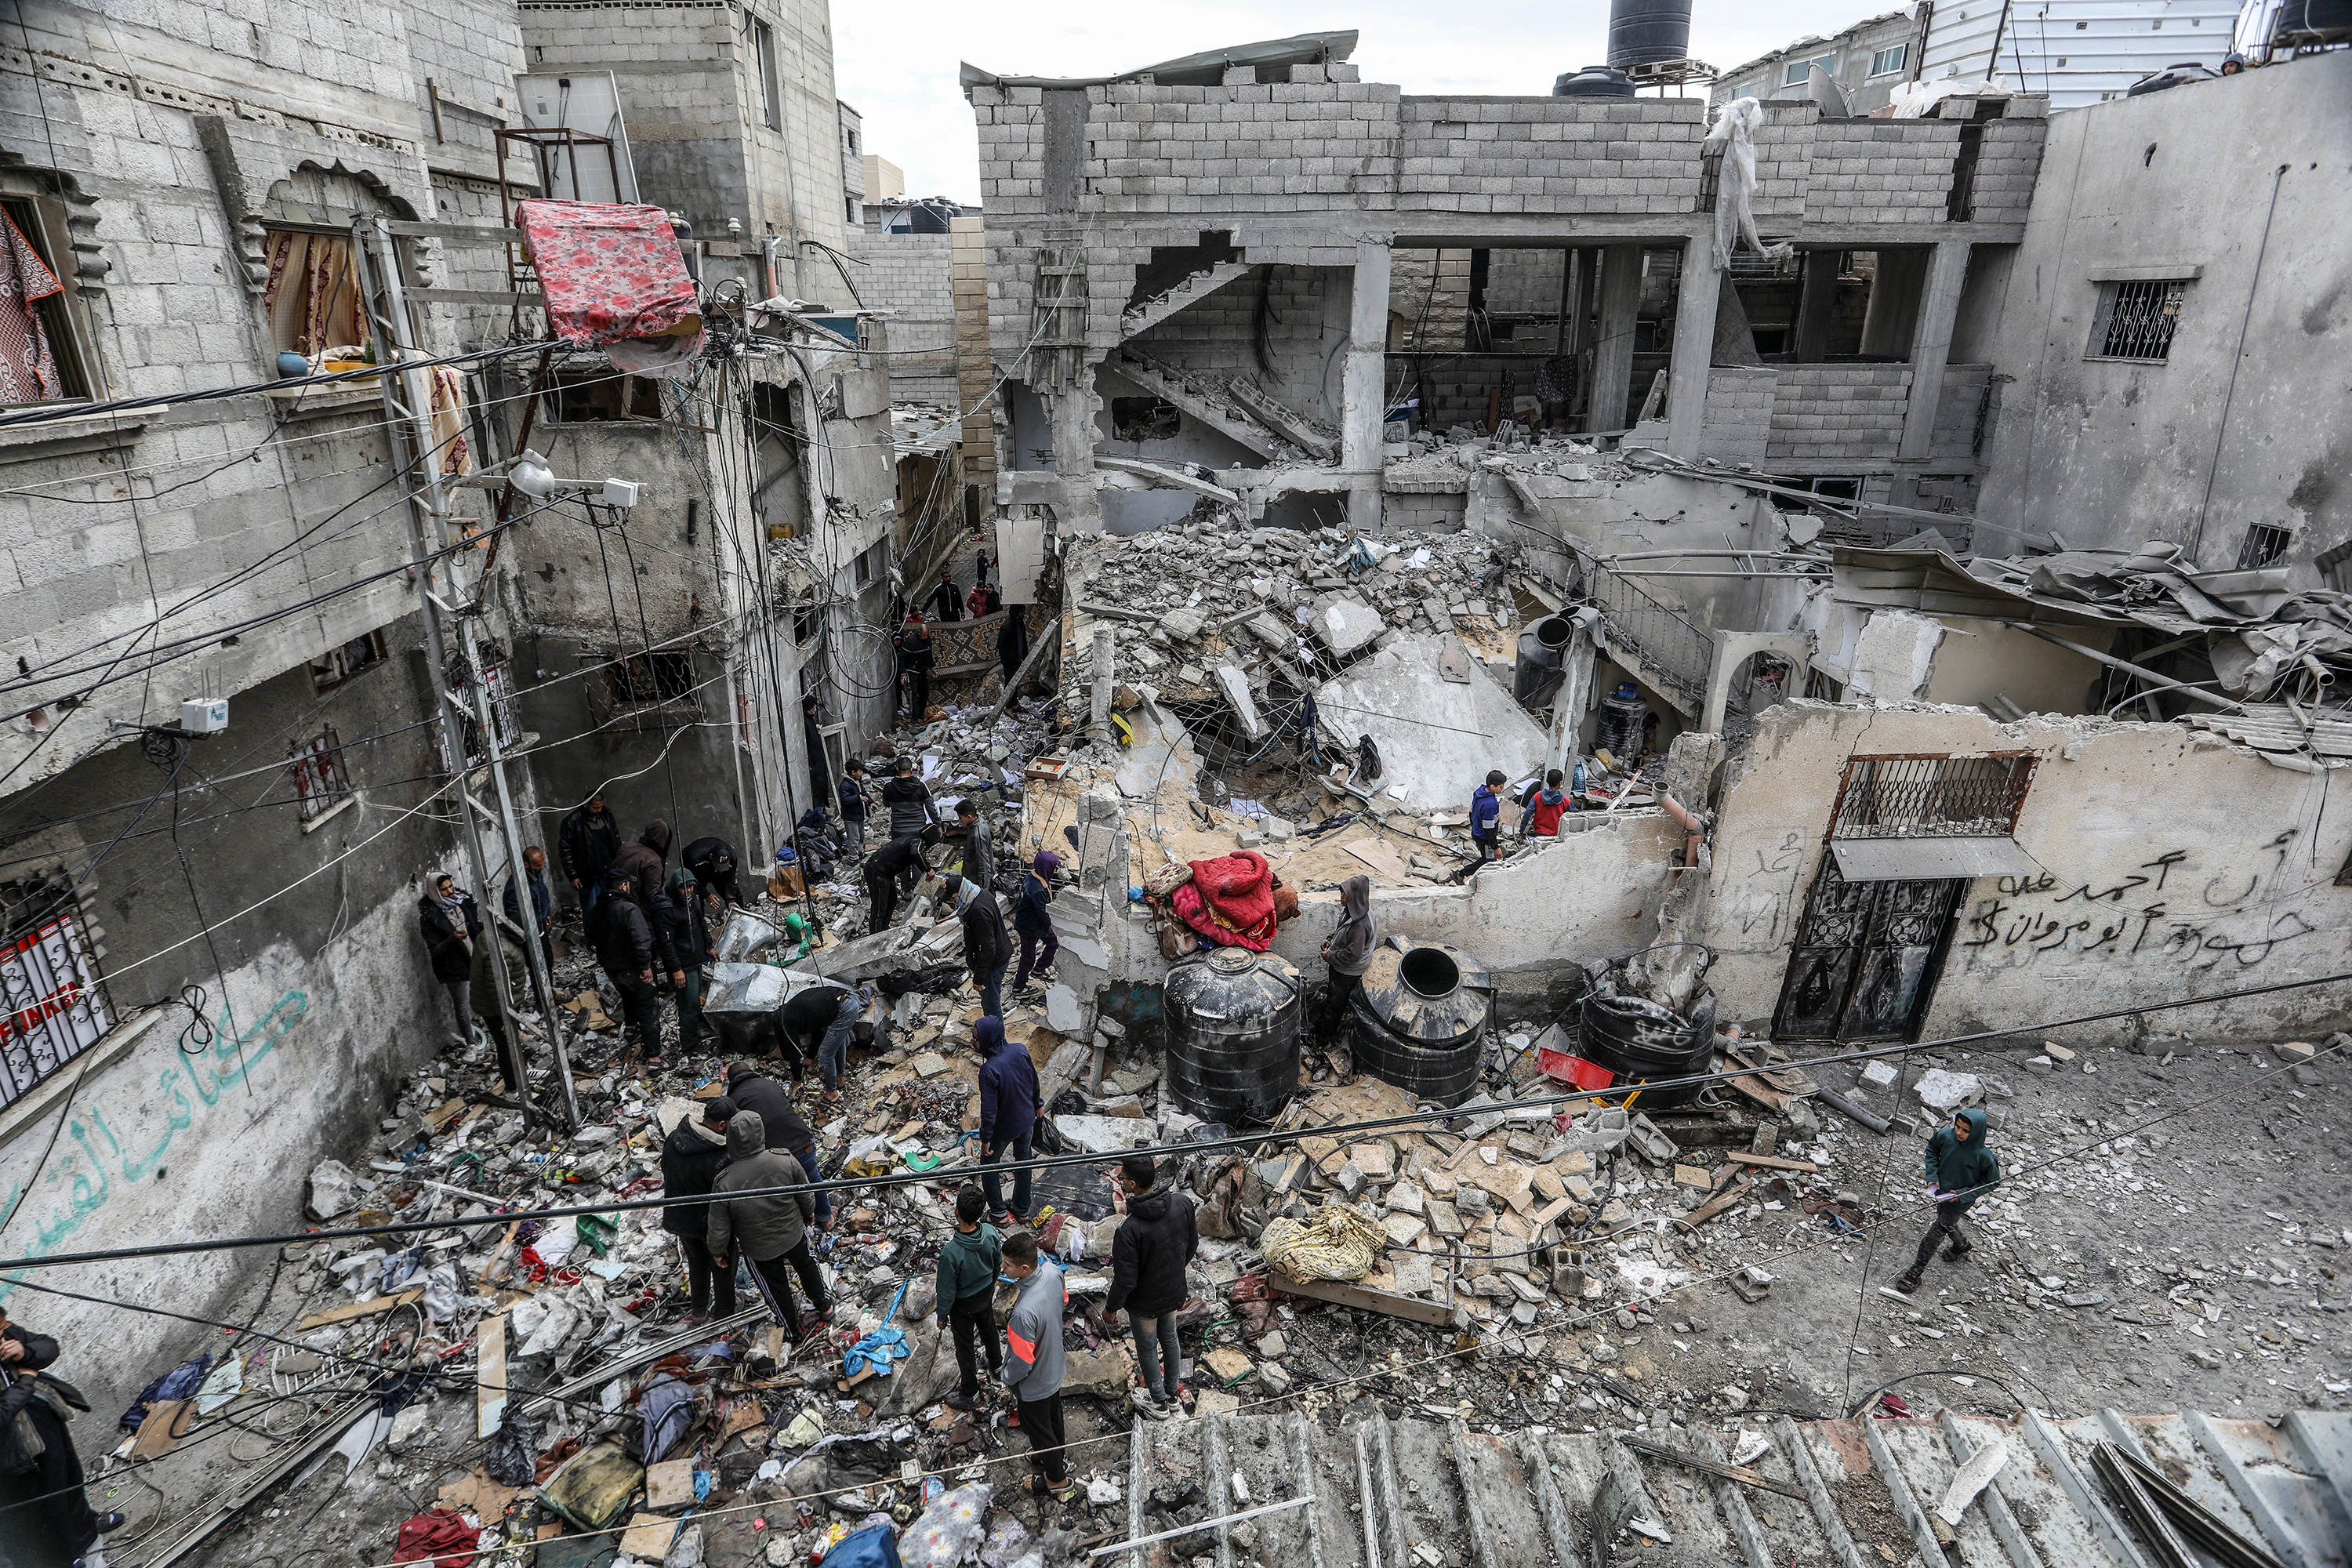 Palestinians residents examines the rubbles of destroyed buildings following Israeli attacks in Rafah, Gaza on February 16.